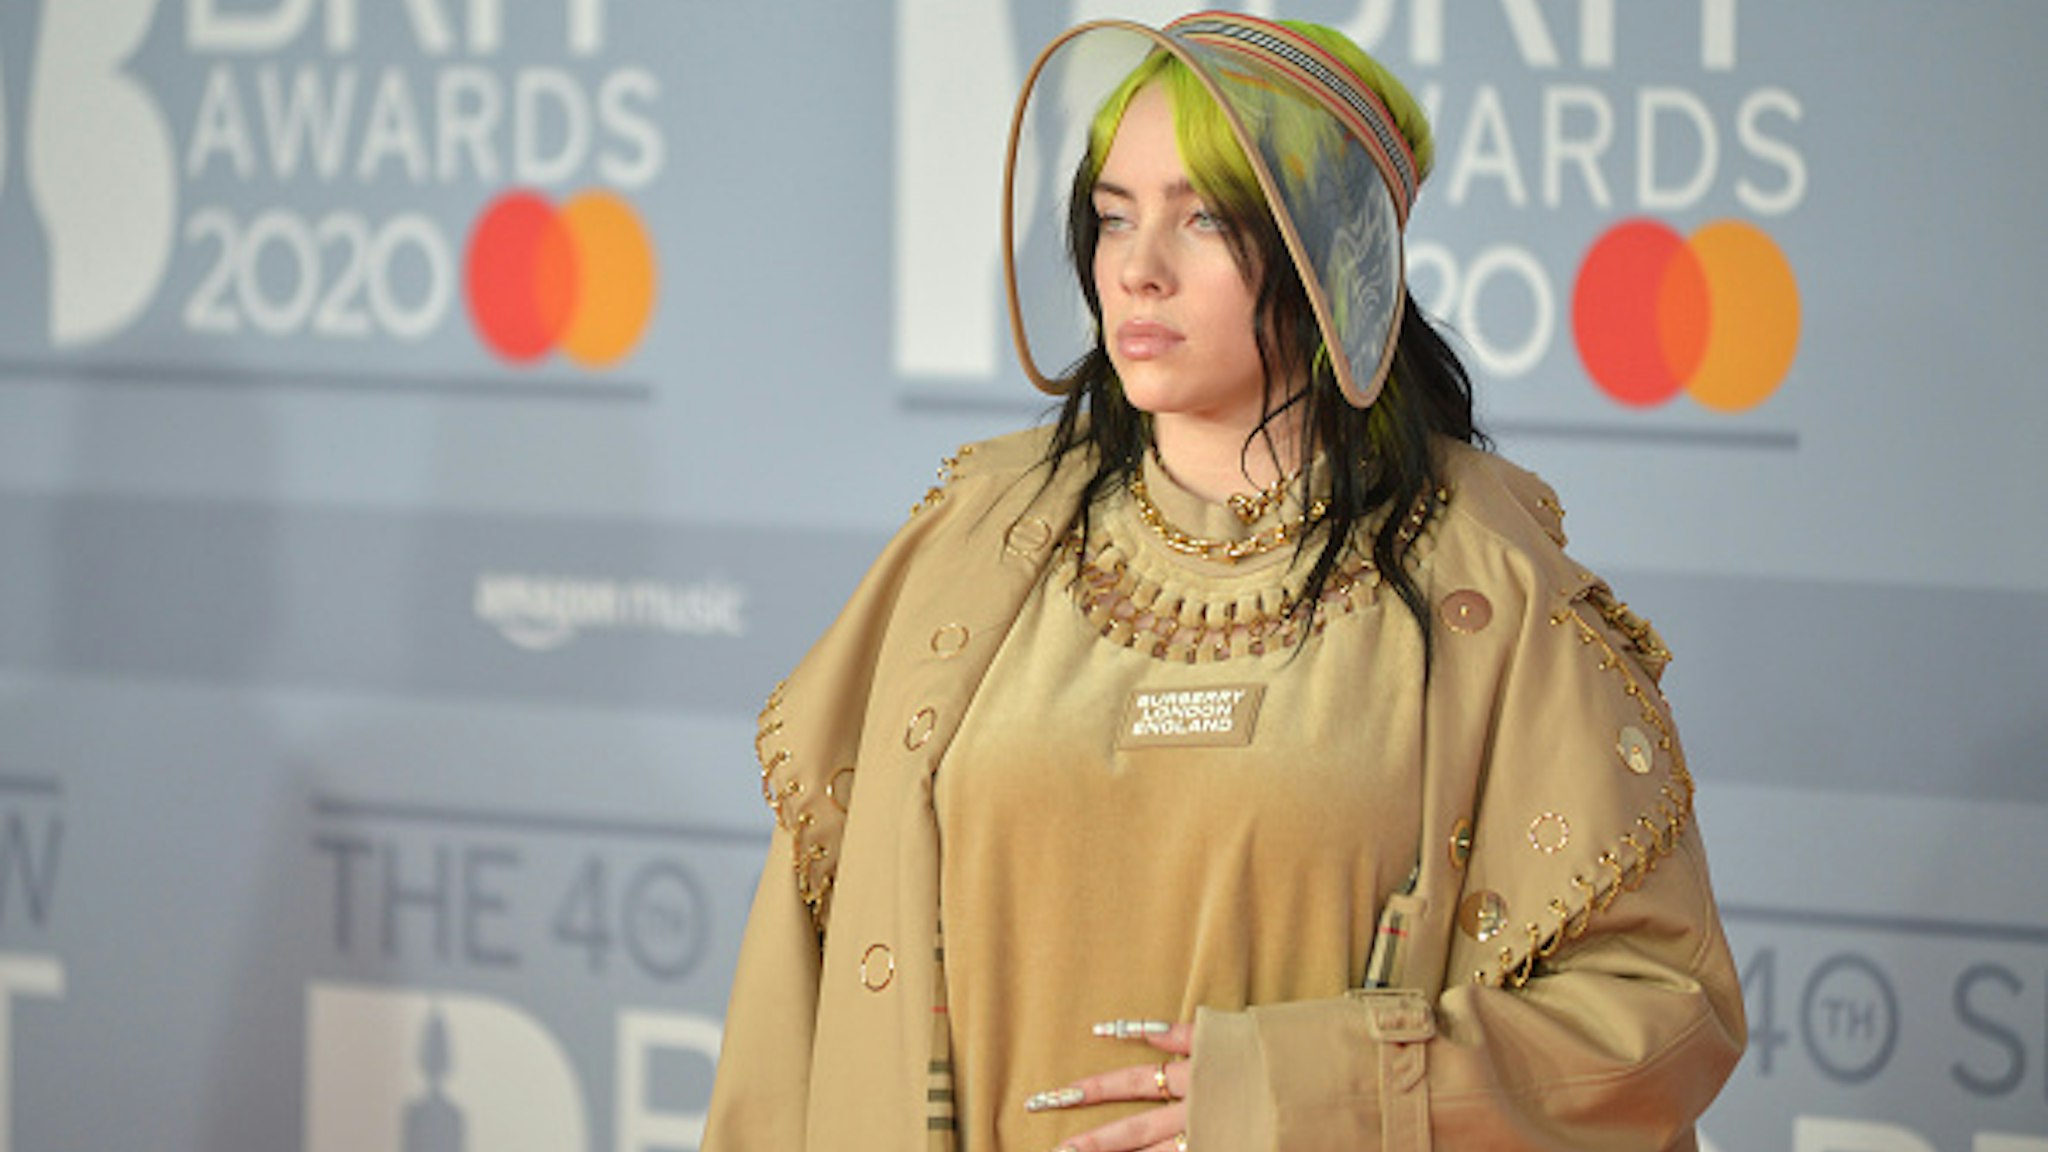 LONDON, ENGLAND - FEBRUARY 18: (EDITORIAL USE ONLY) Billie Eilish attends The BRIT Awards 2020 at The O2 Arena on February 18, 2020 in London, England.